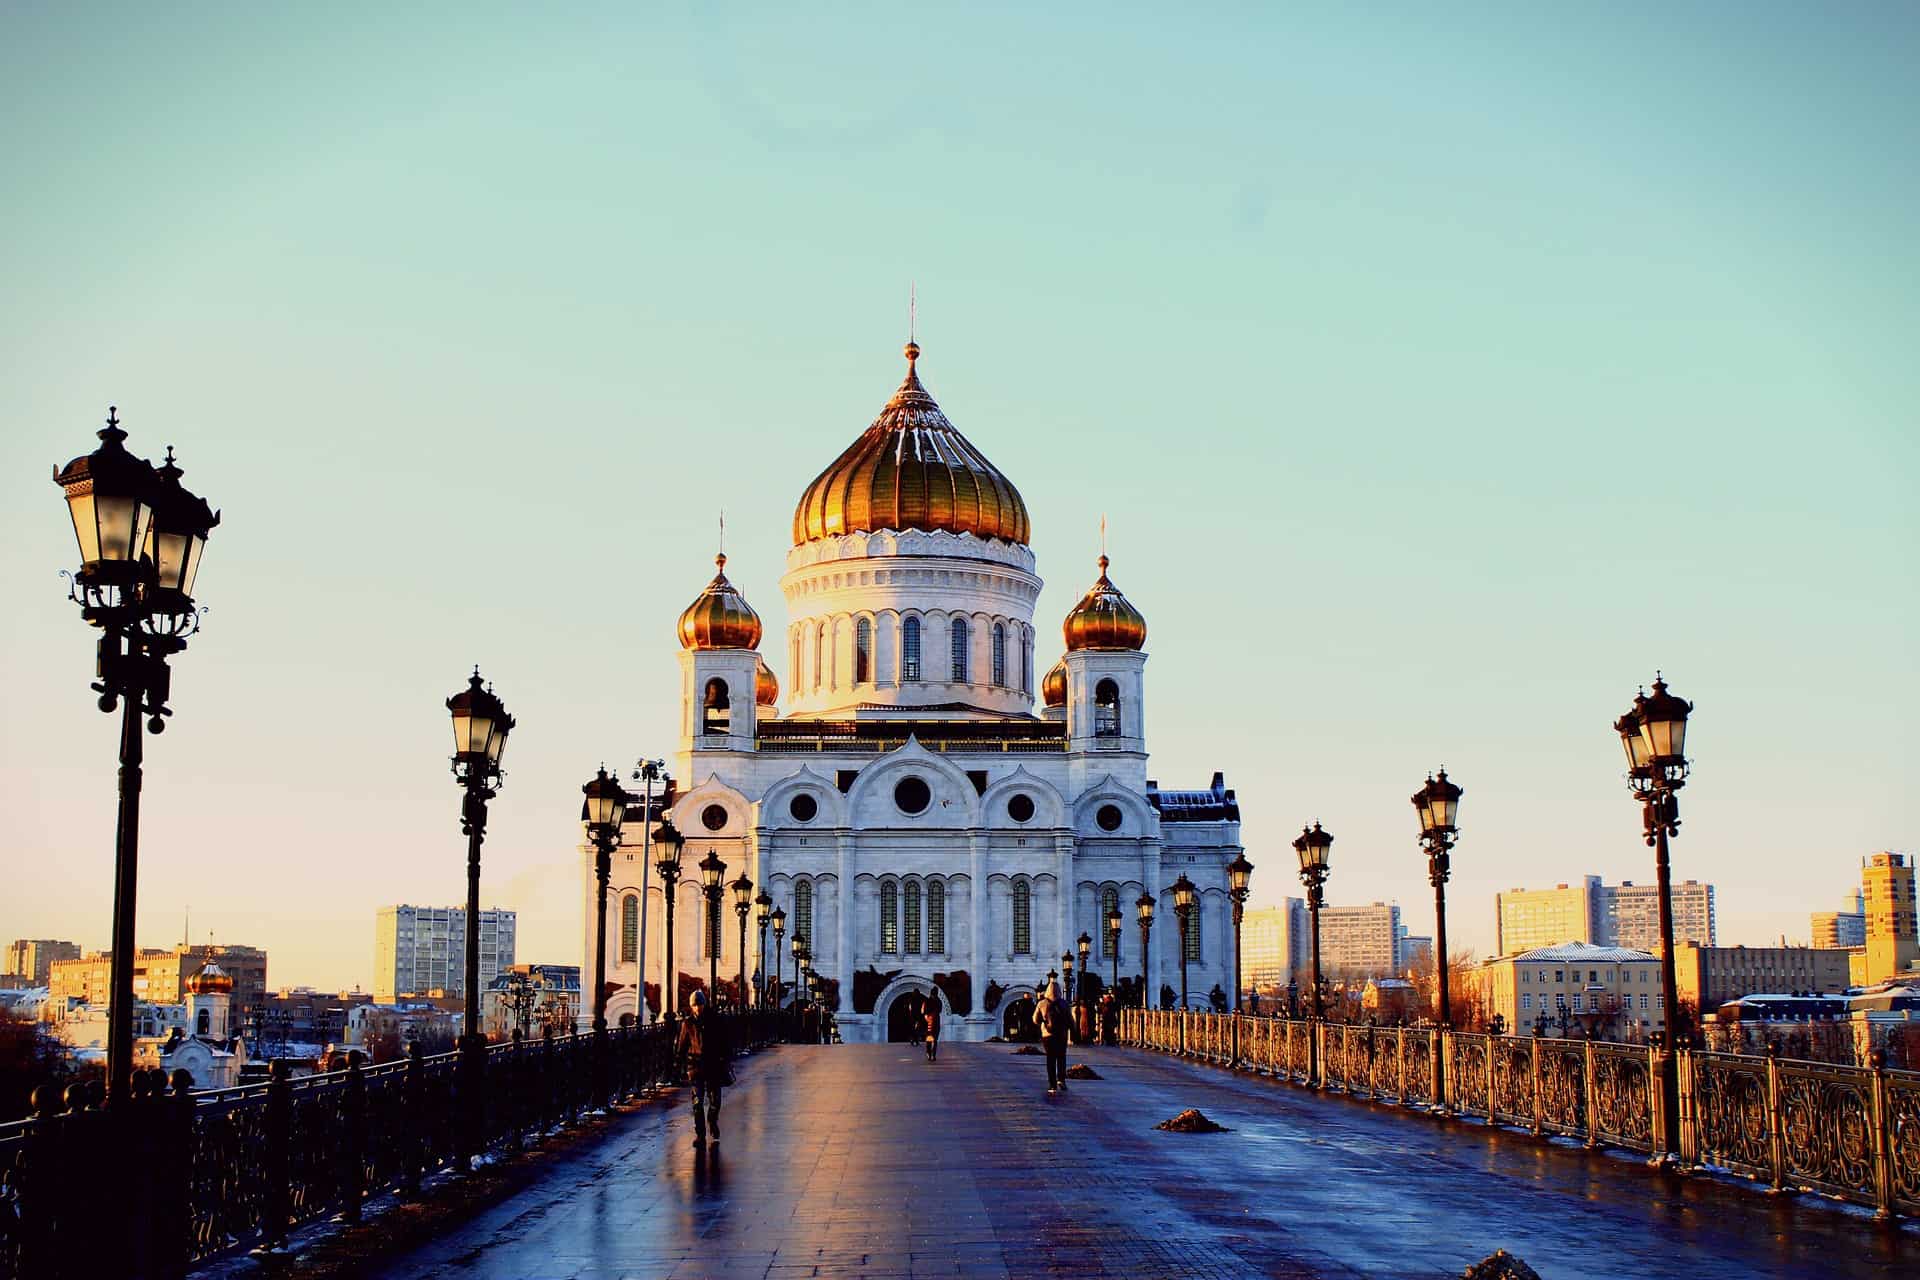 Travelling from Moscow to St. Petersburg by plane, train or bus. What’s better?